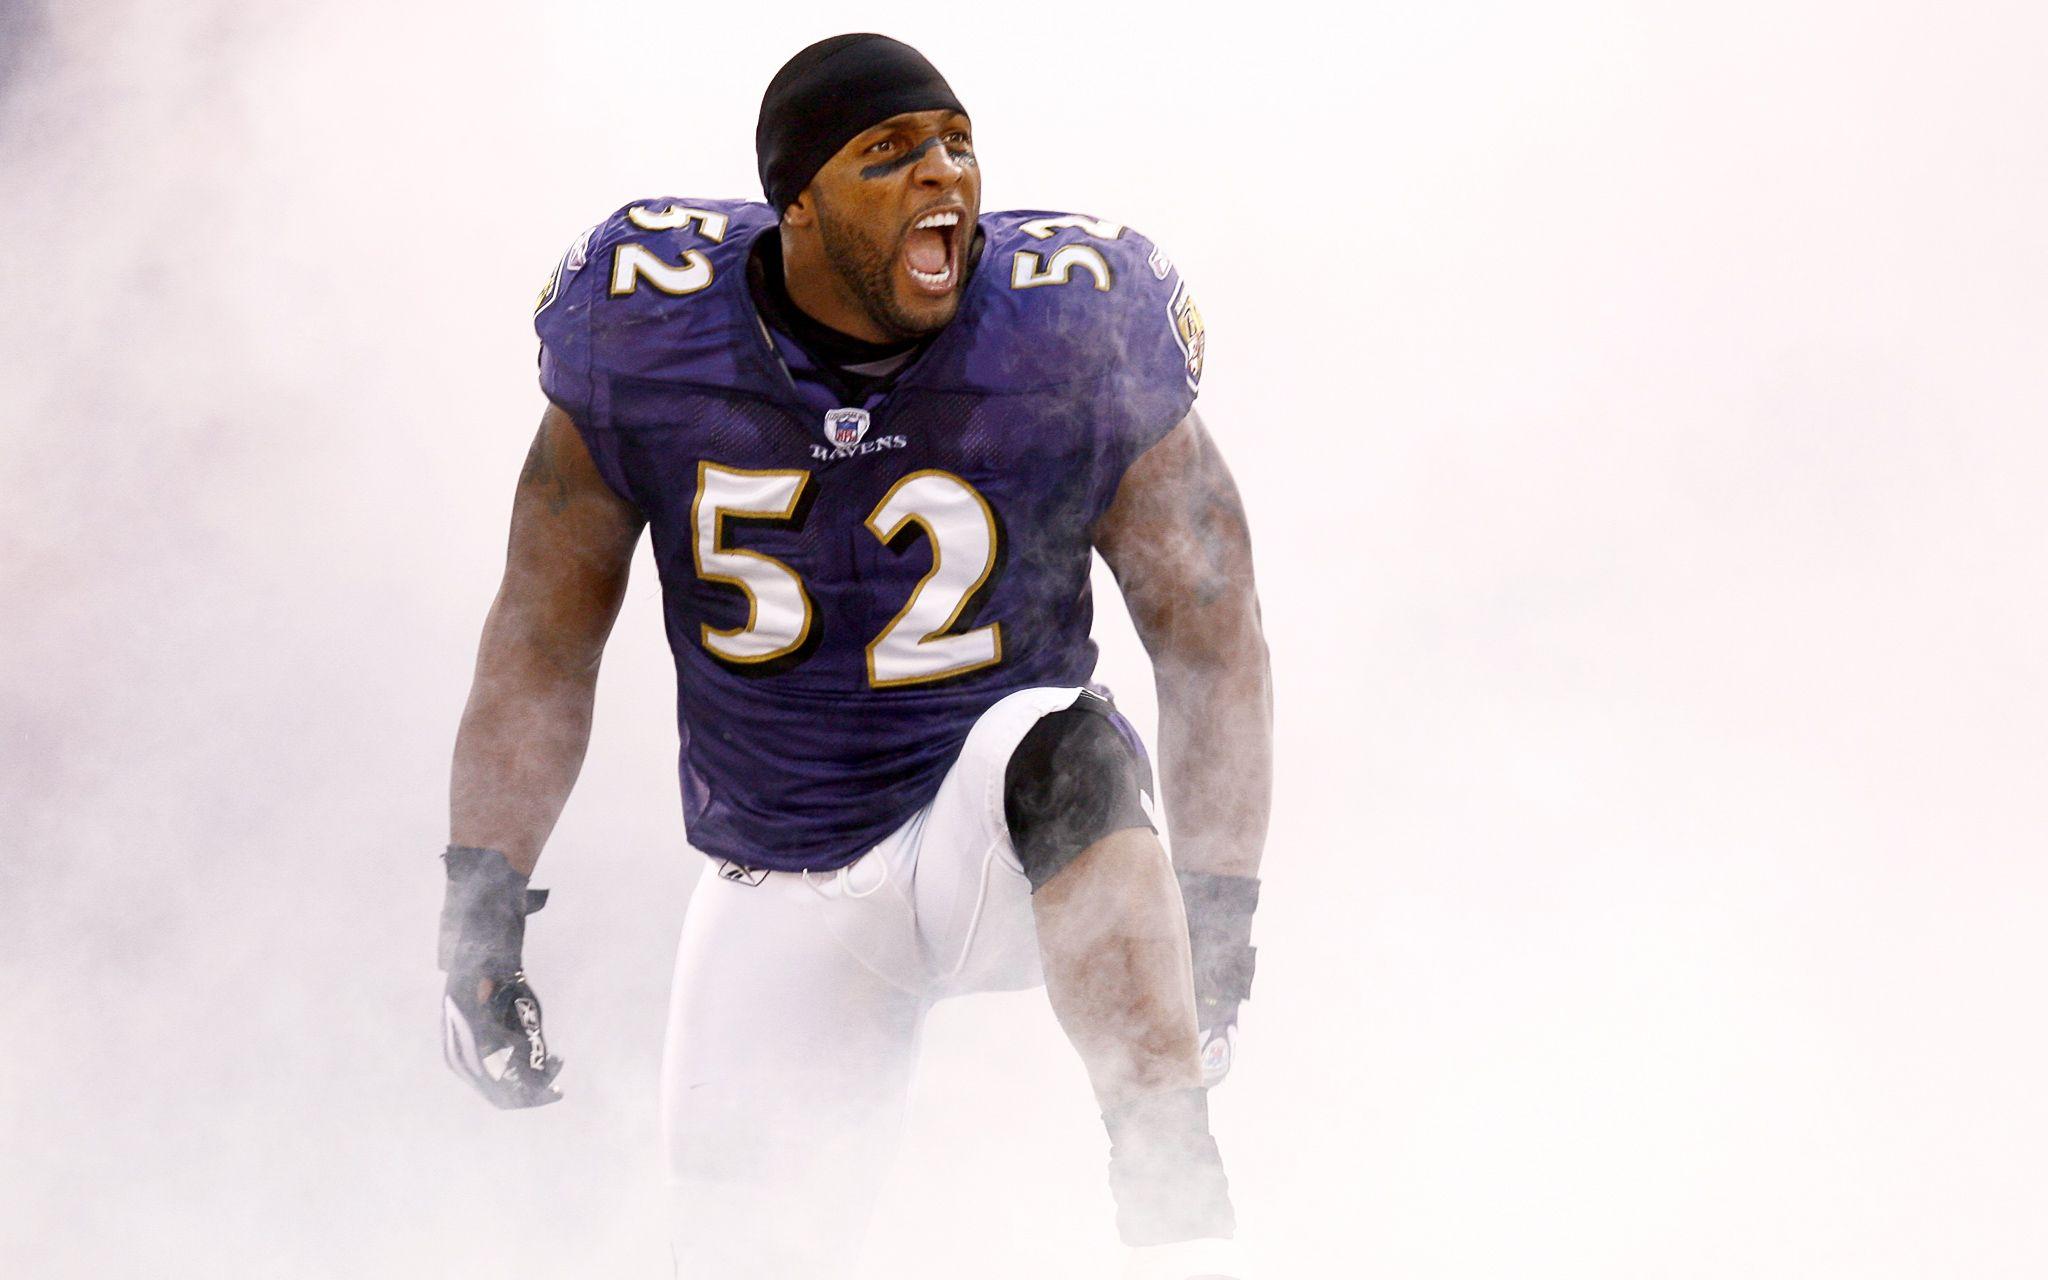 Ray Lewis Wallpapers HD for Desktop and Mobile.